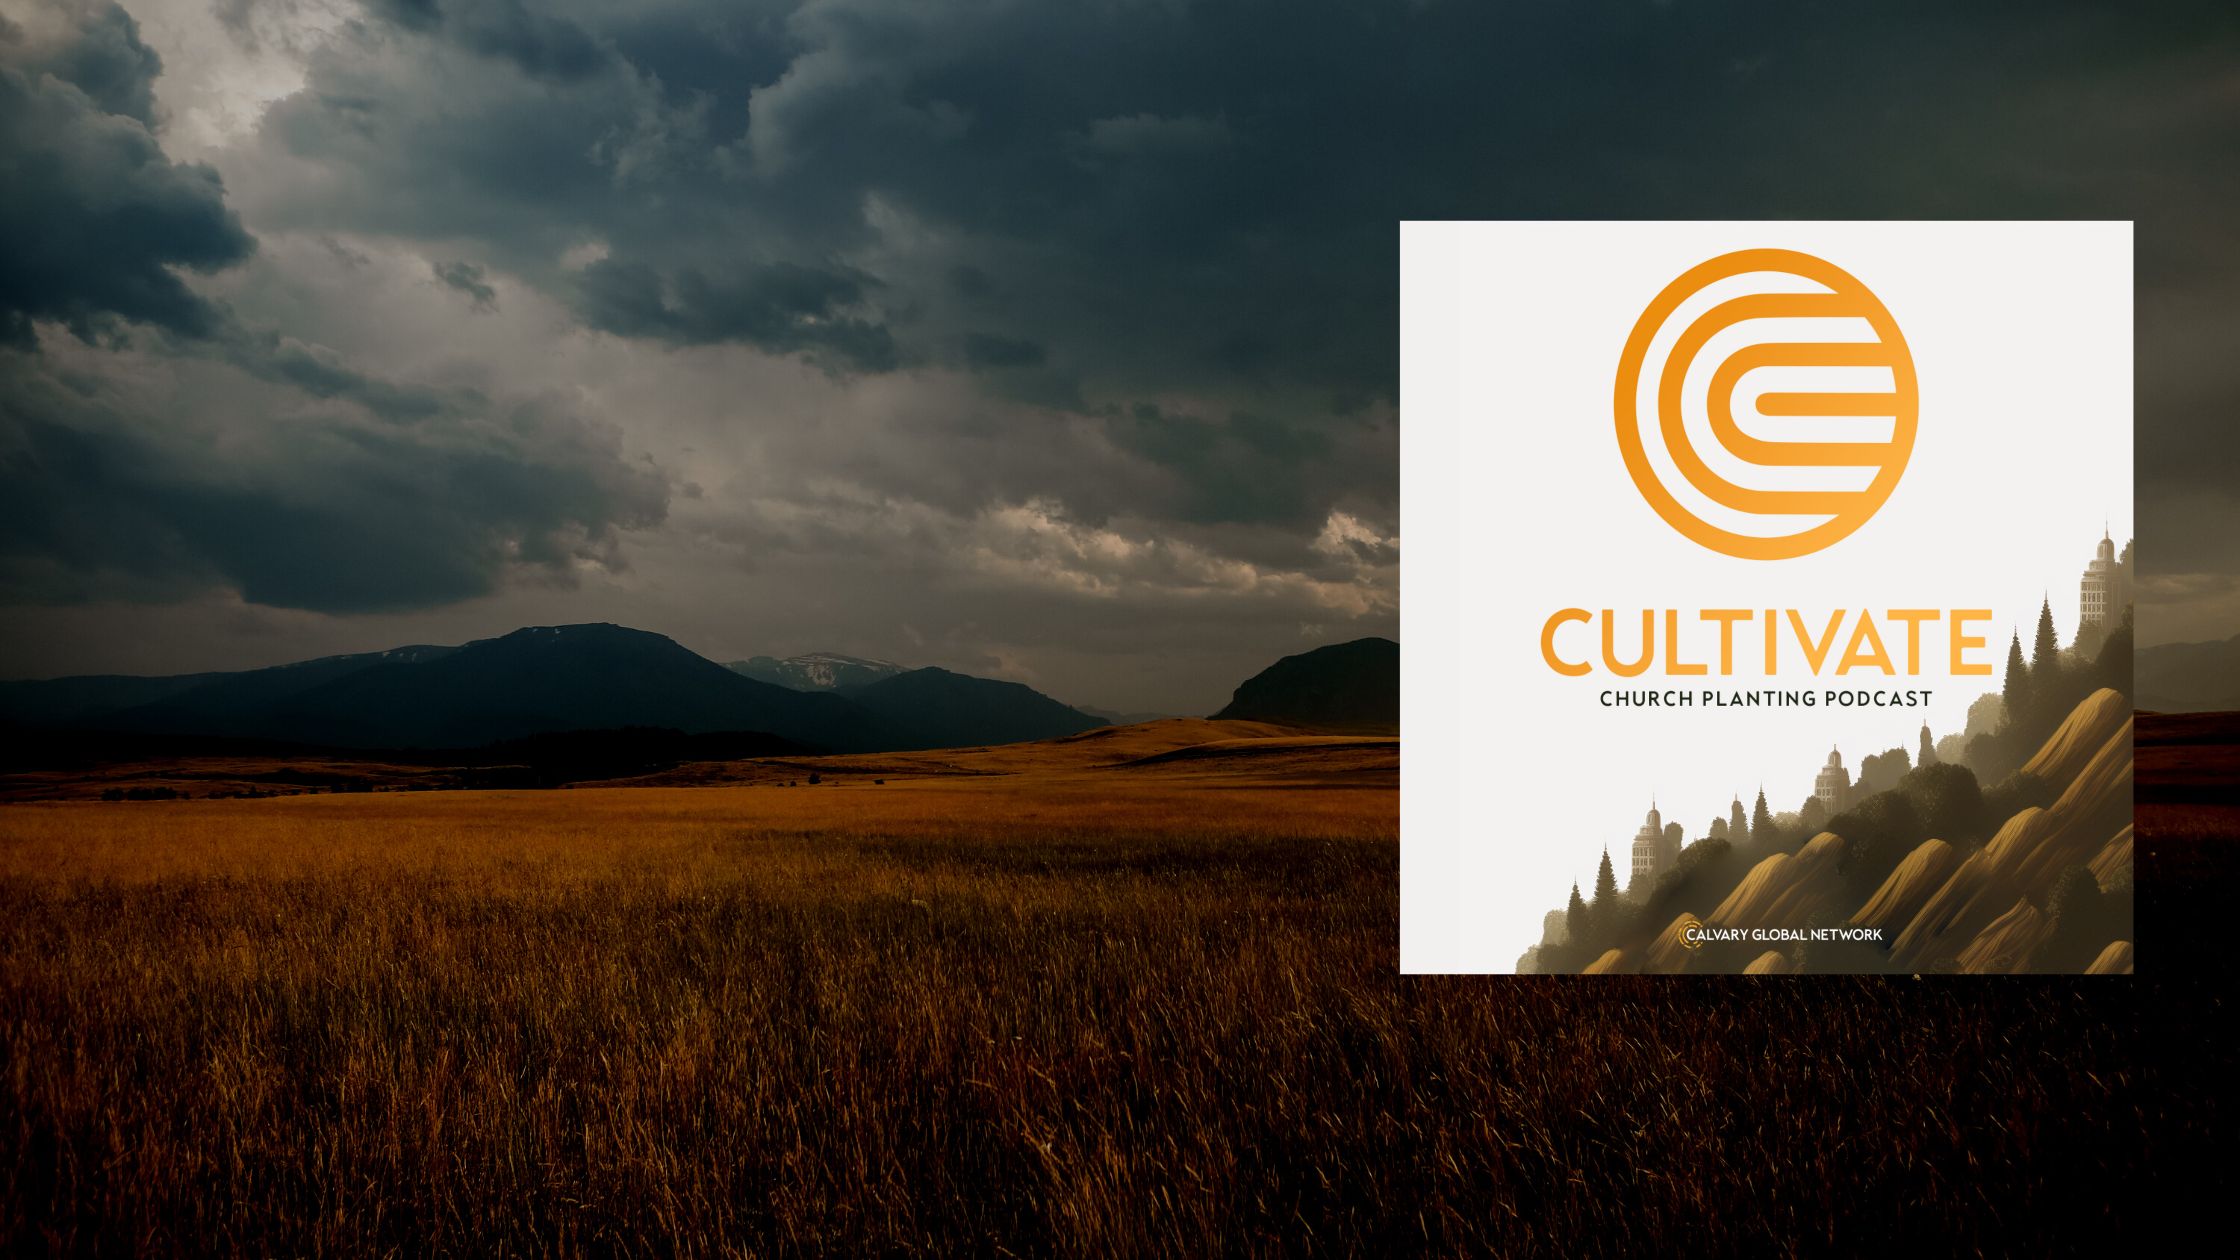 Introducing The Cultivate Church Planting Podcast!